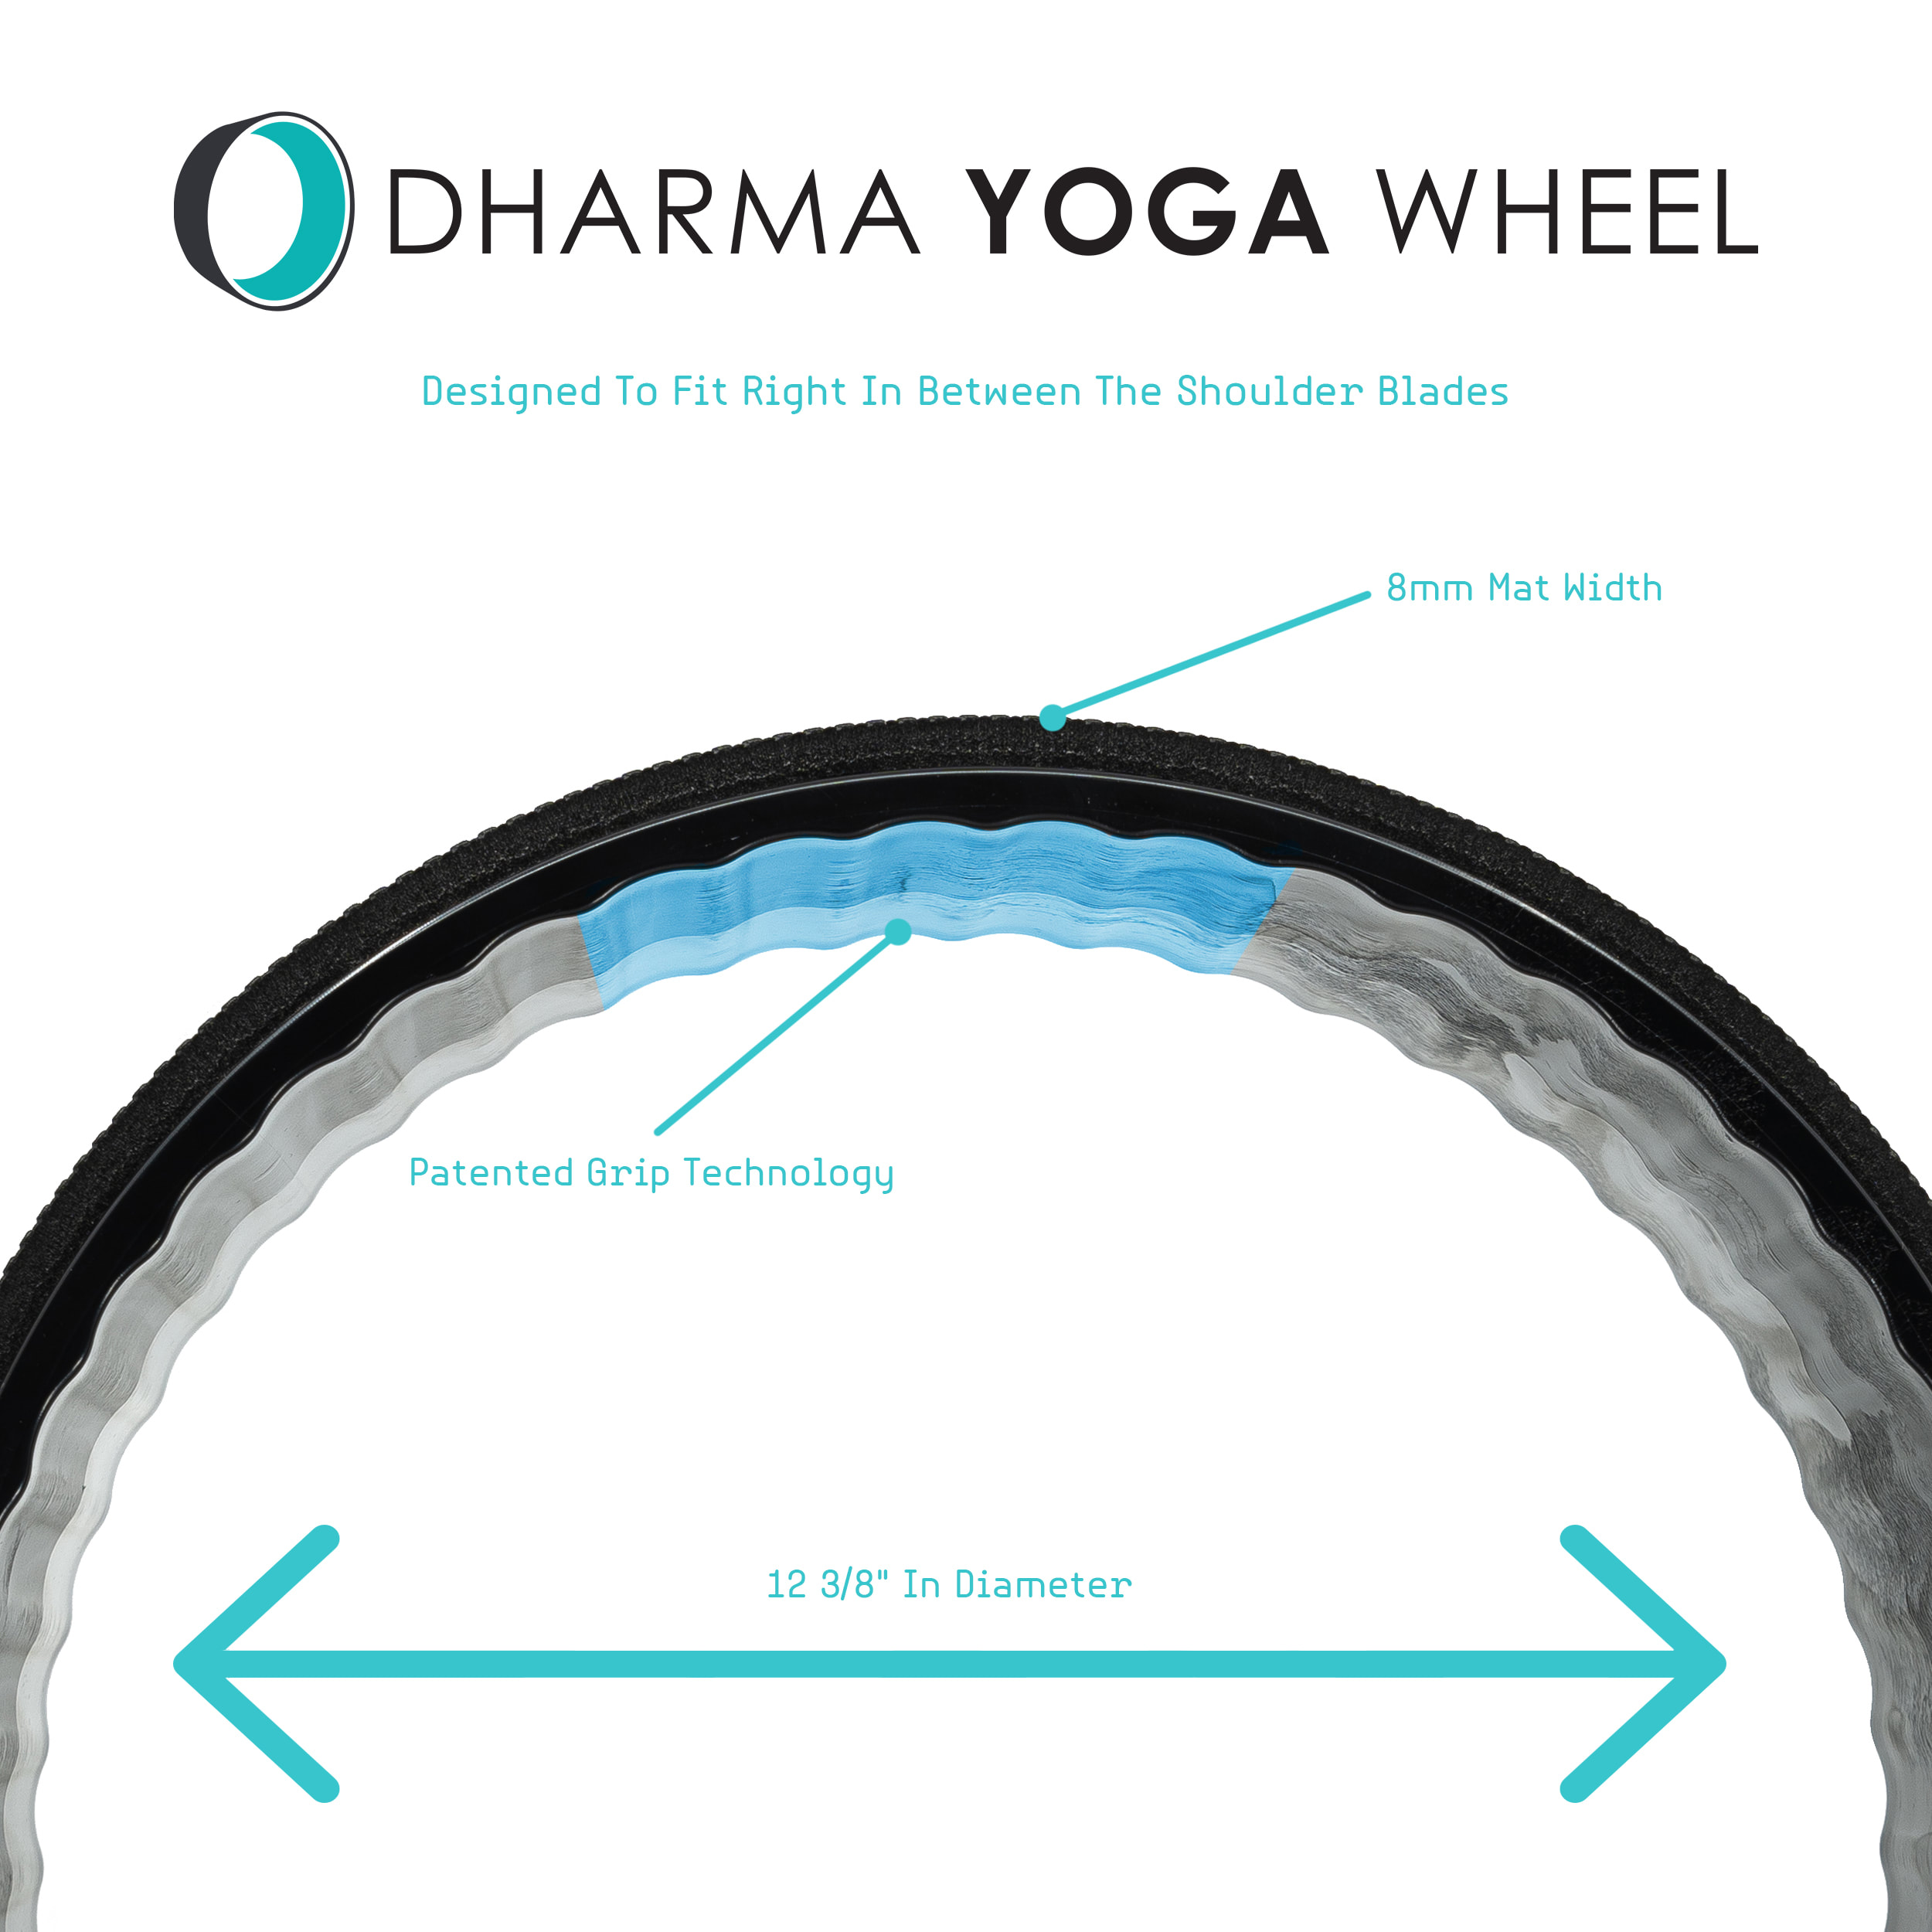 Seven Therapeutic Benefits of Using a Yoga Wheel